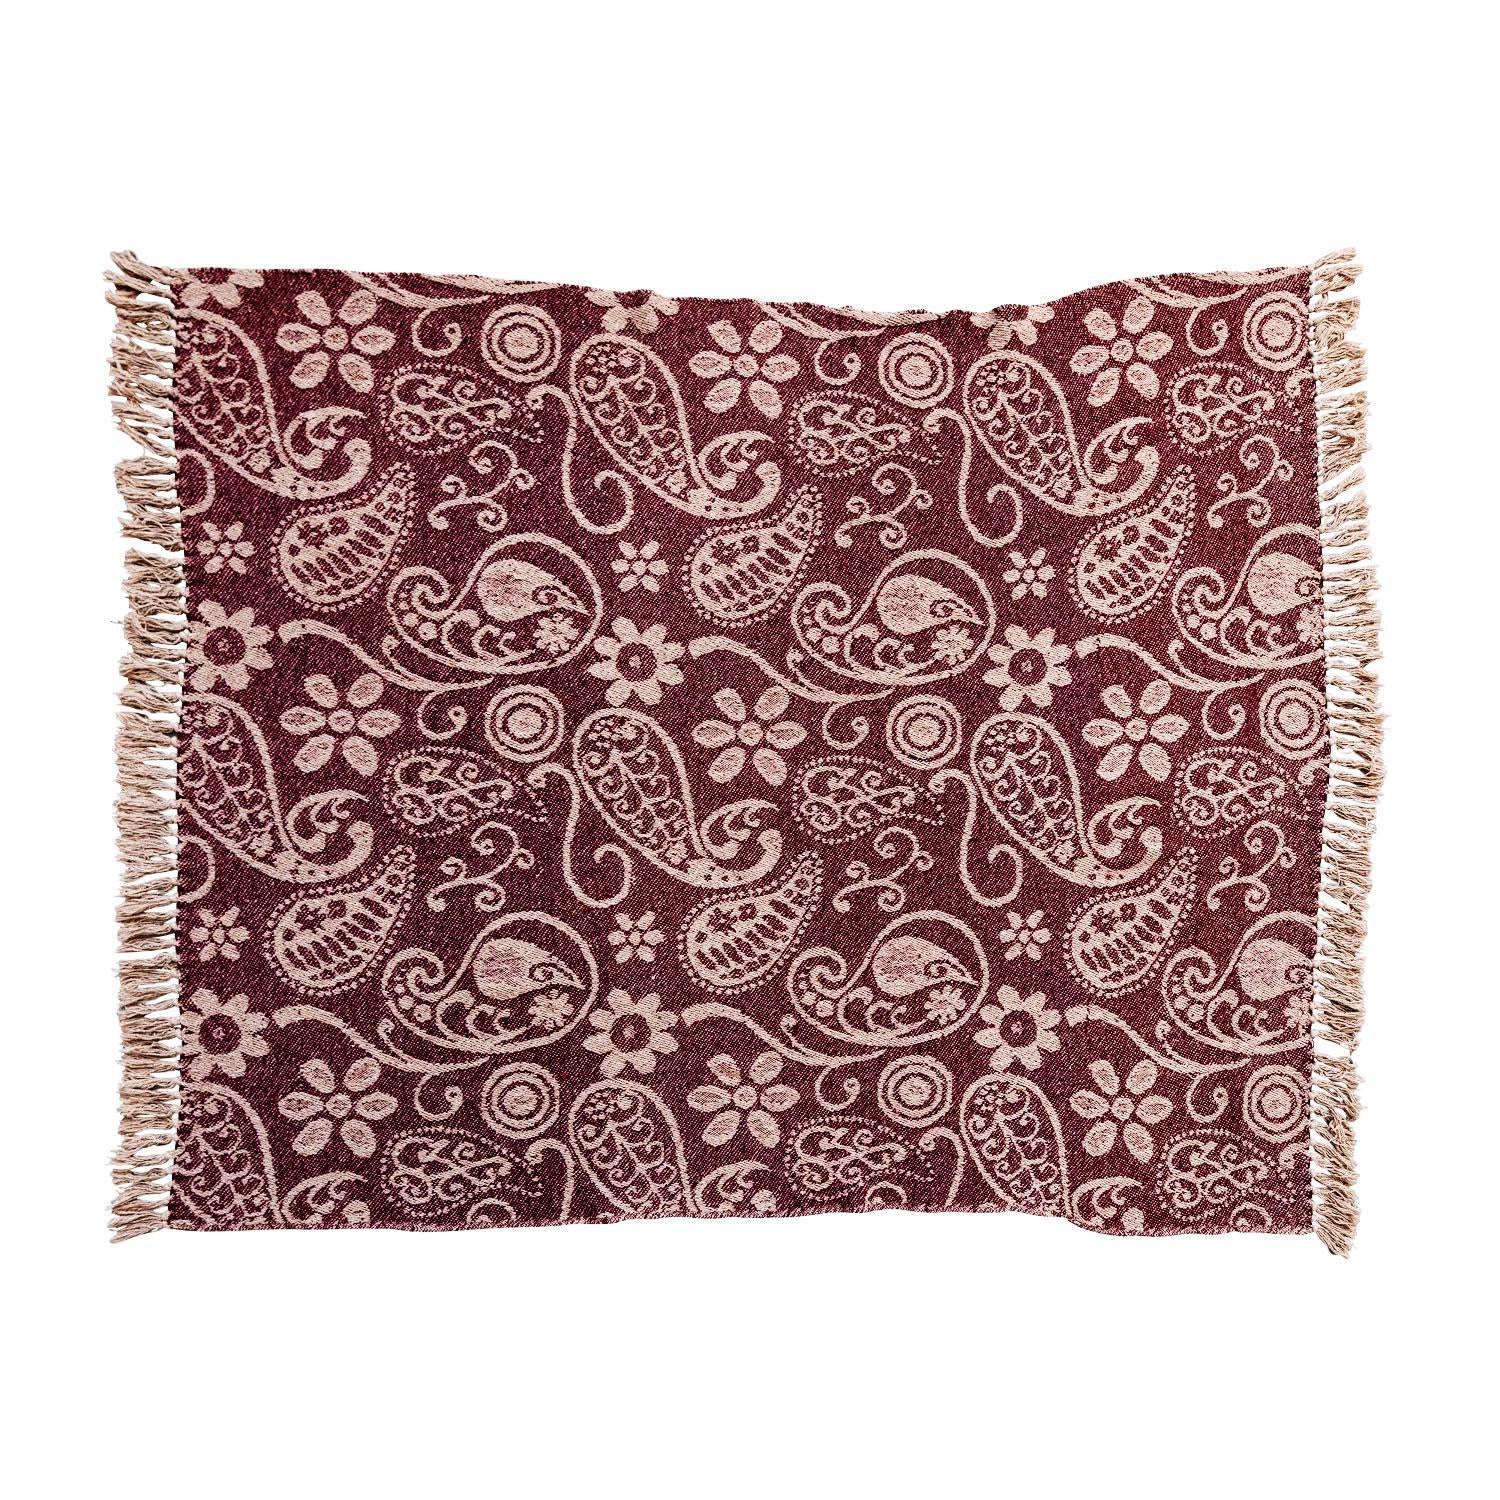 Red and beige Recycled Cotton Throw blanket